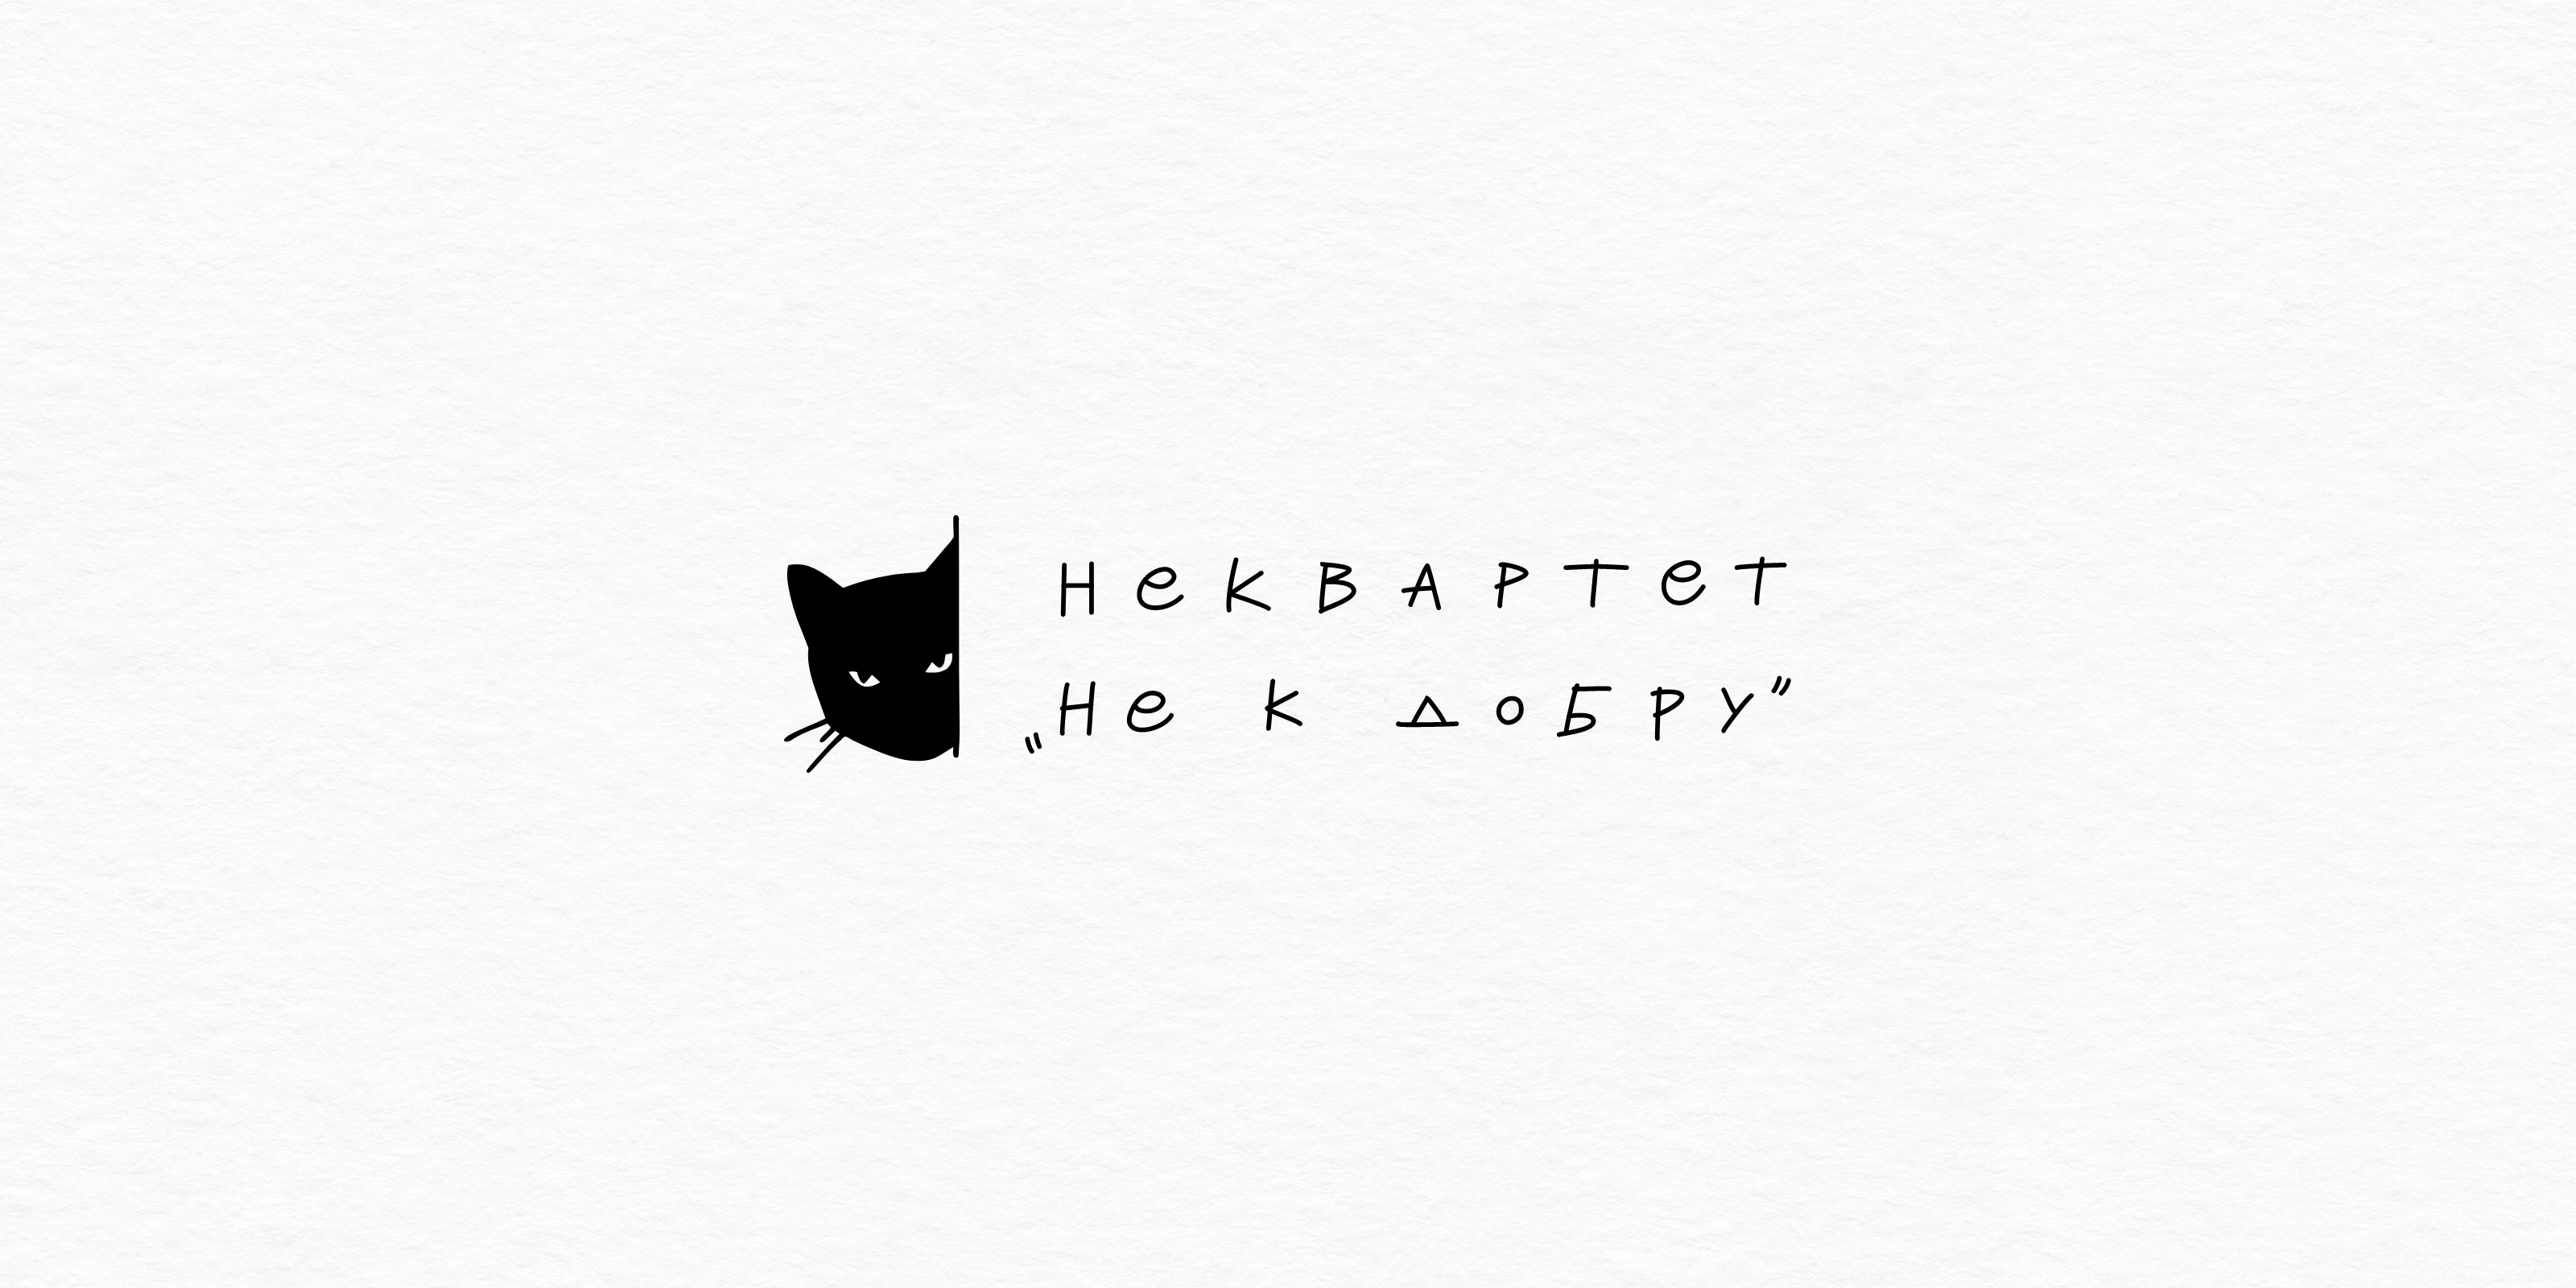 Logo with a cat and text in Russian "неквартет не к добру"